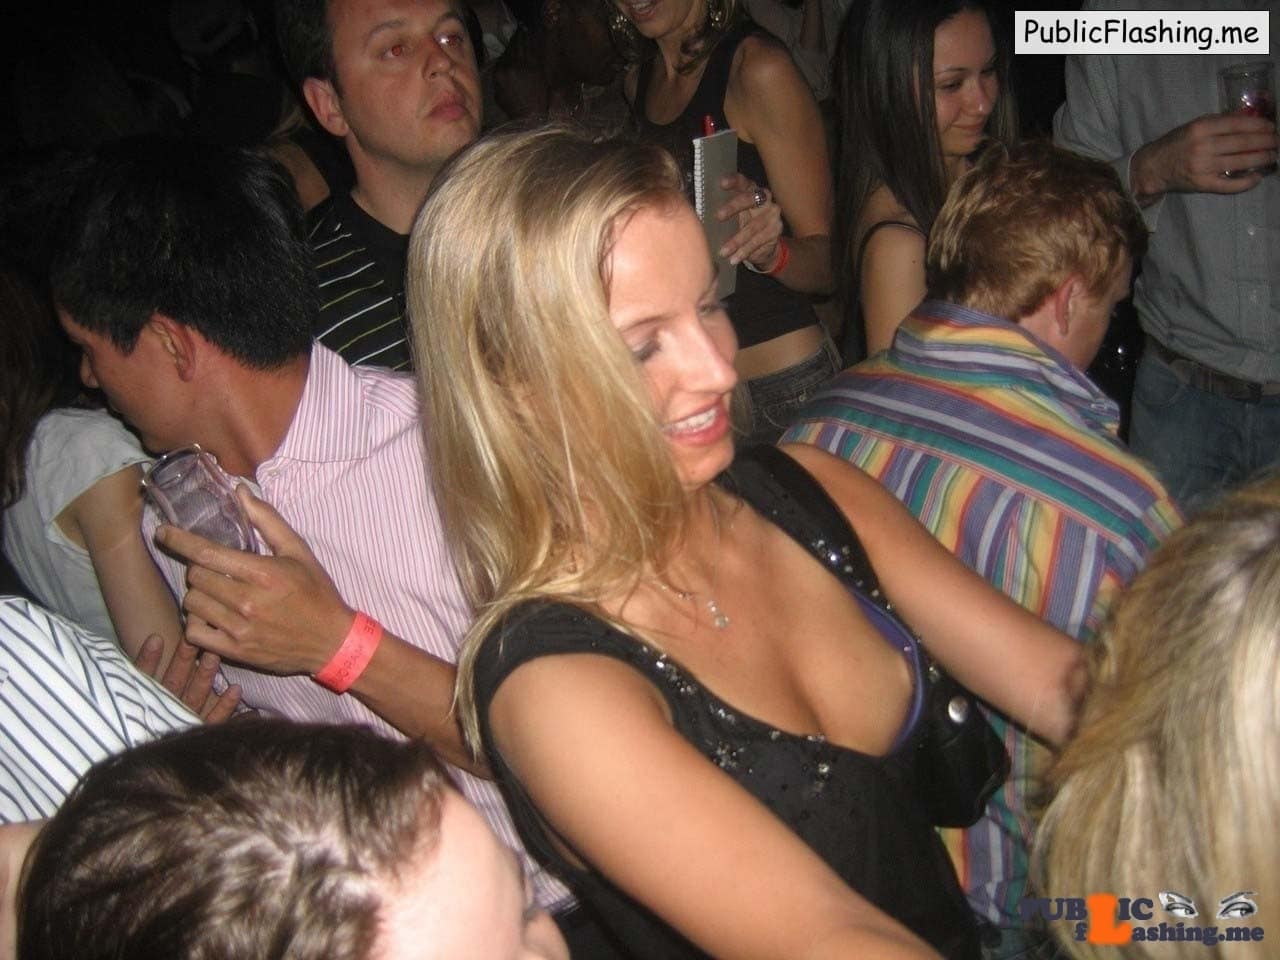 Public Flashing Pictures Public Flashing Photo Feed Nipple slip pics Nipple slip College pics College Amateur pics Amateur  : Naughty nipple of beautiful college girl almost caught on a party. Nip slip photos are always interesting to all men and girls and this one was captured accidentally while this cute beauty who looks like Britney Spears was dancing with friends. This...